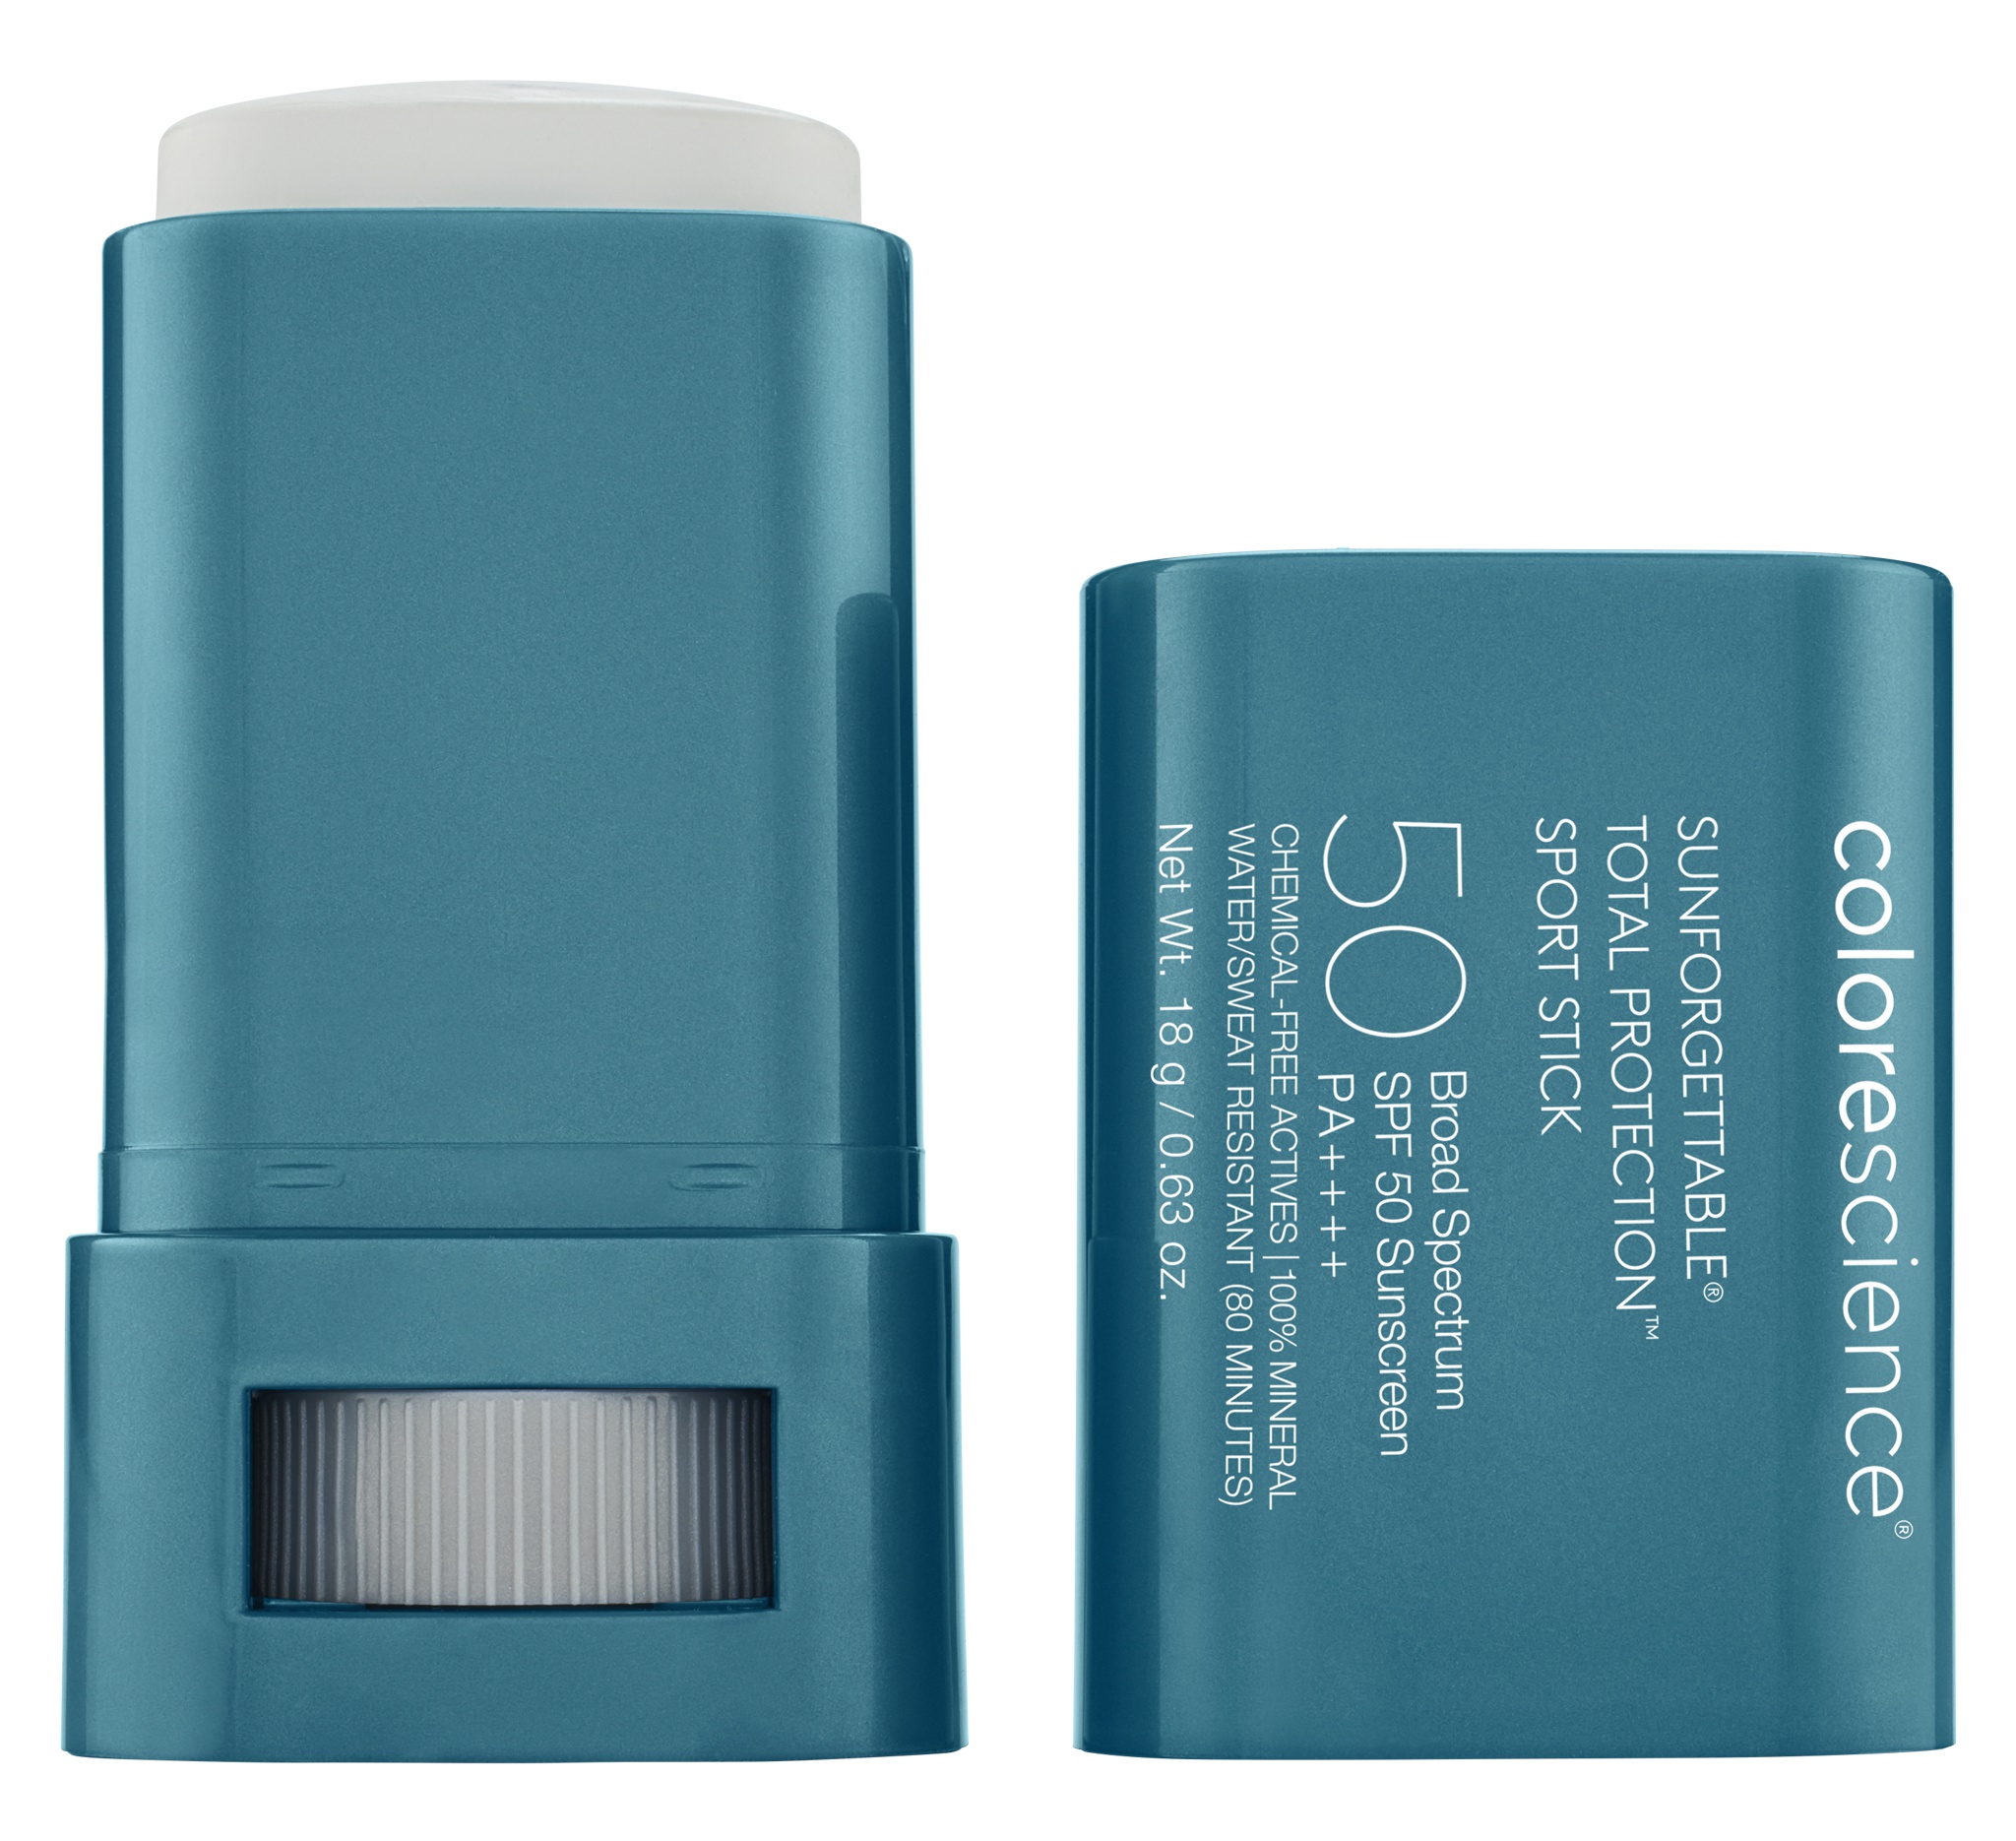 Colorescience Sunforgettable Total Protection Sport Stick SPF 50